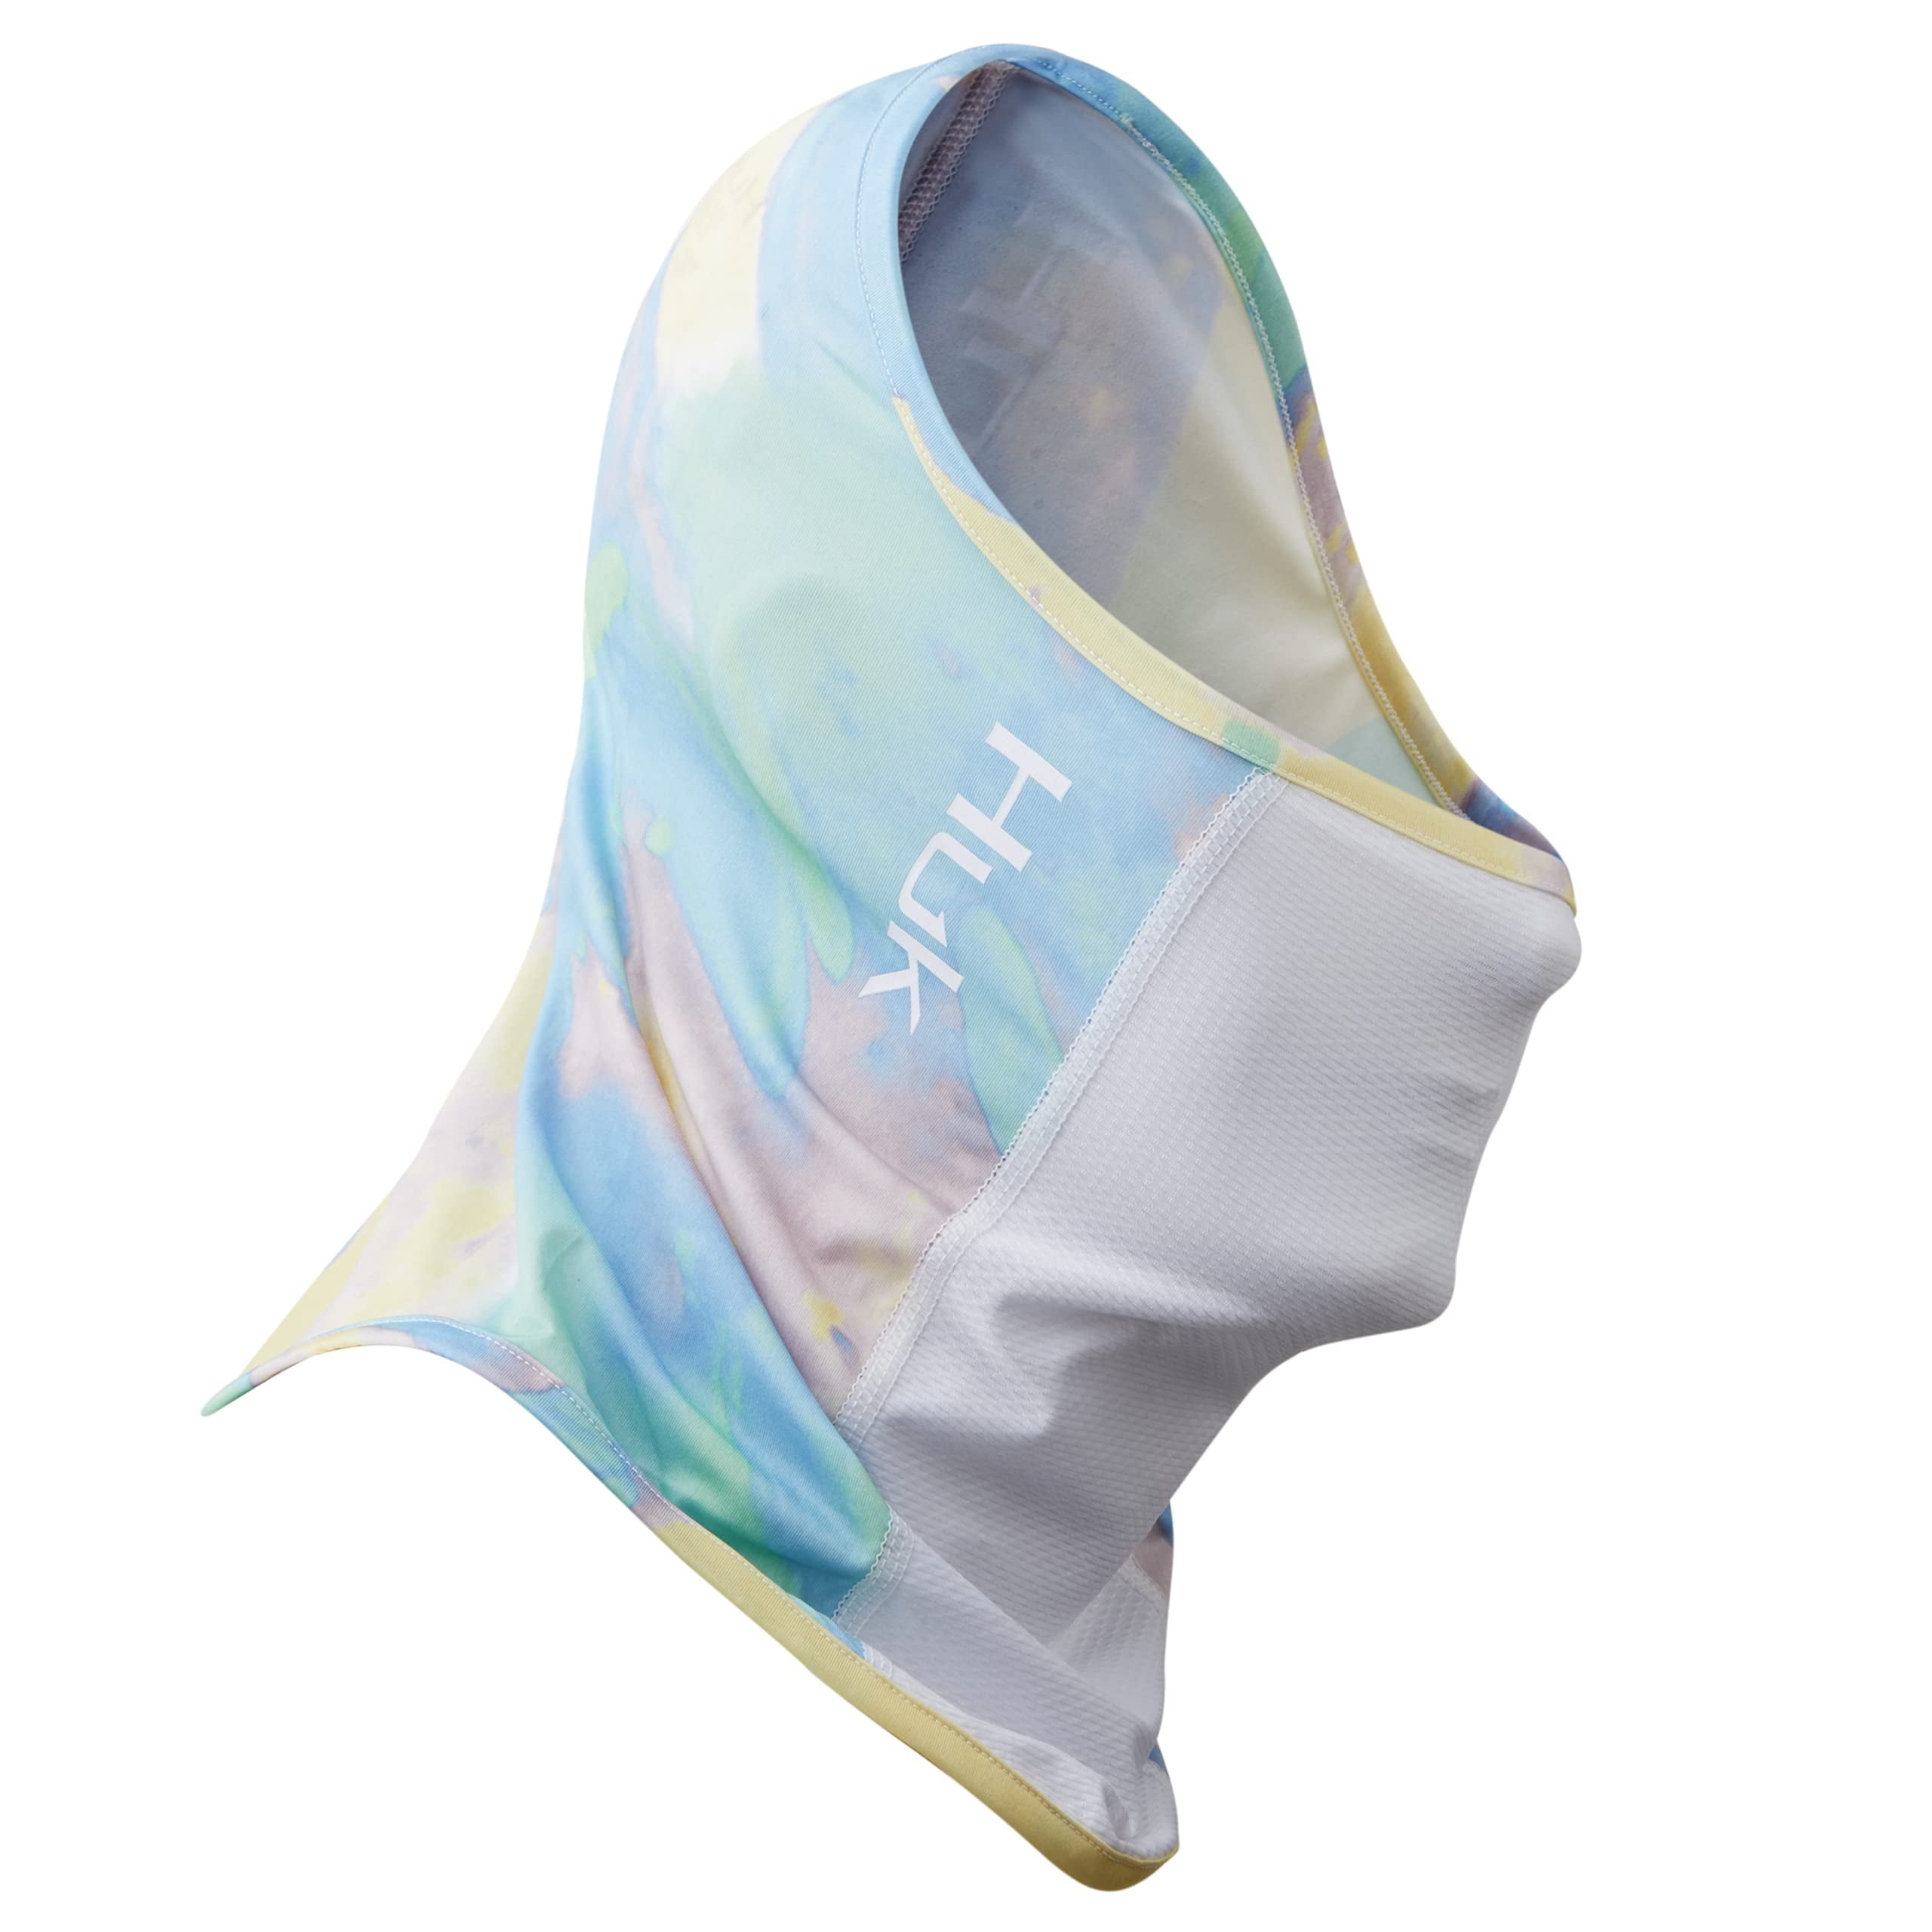 Huk Tie Dye Fishing UV Face Protection Mask Gaiter, One Size (Tie